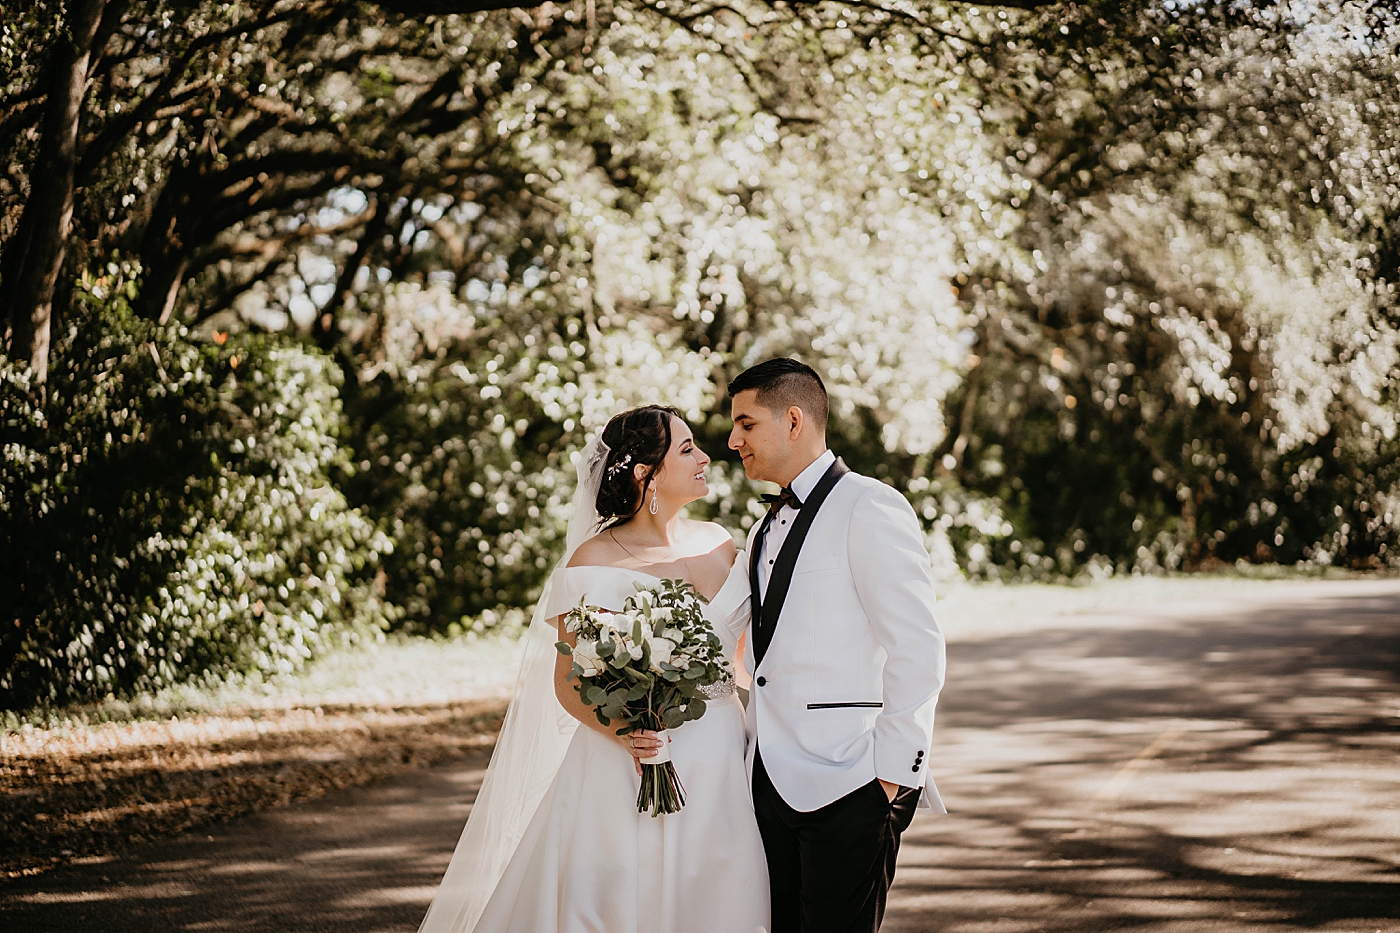 Bride and Groom close to each other looking into each others eyes on path Lavan Venue Wedding Photography captured by South Florida Wedding Photographer Krystal Capone Photography